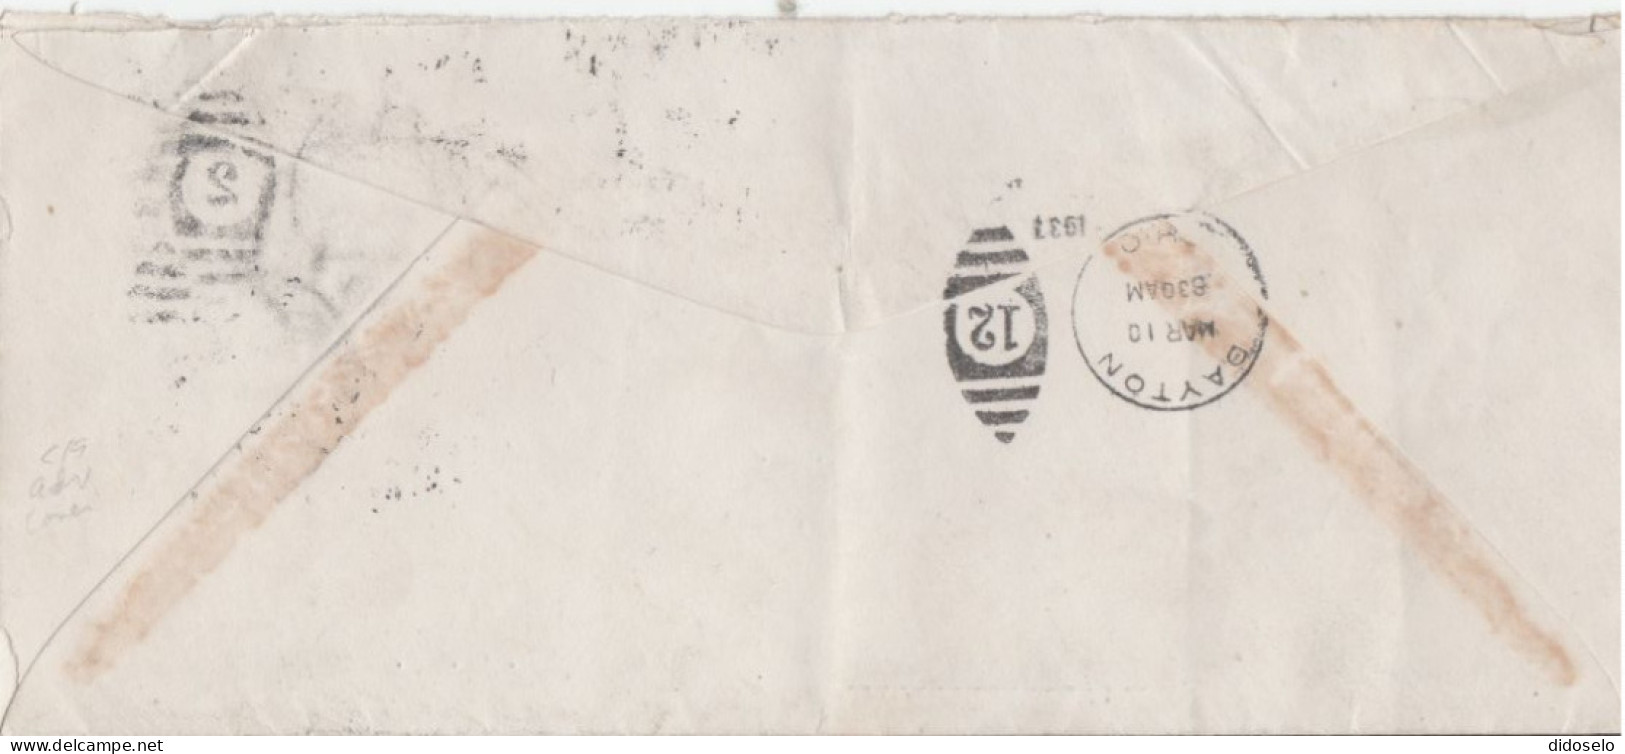 USA - 1937 - Air Mail Cover Detroit - Dayton / Well Canceled With Air Mail Label / Special Delivery - 1c. 1918-1940 Covers